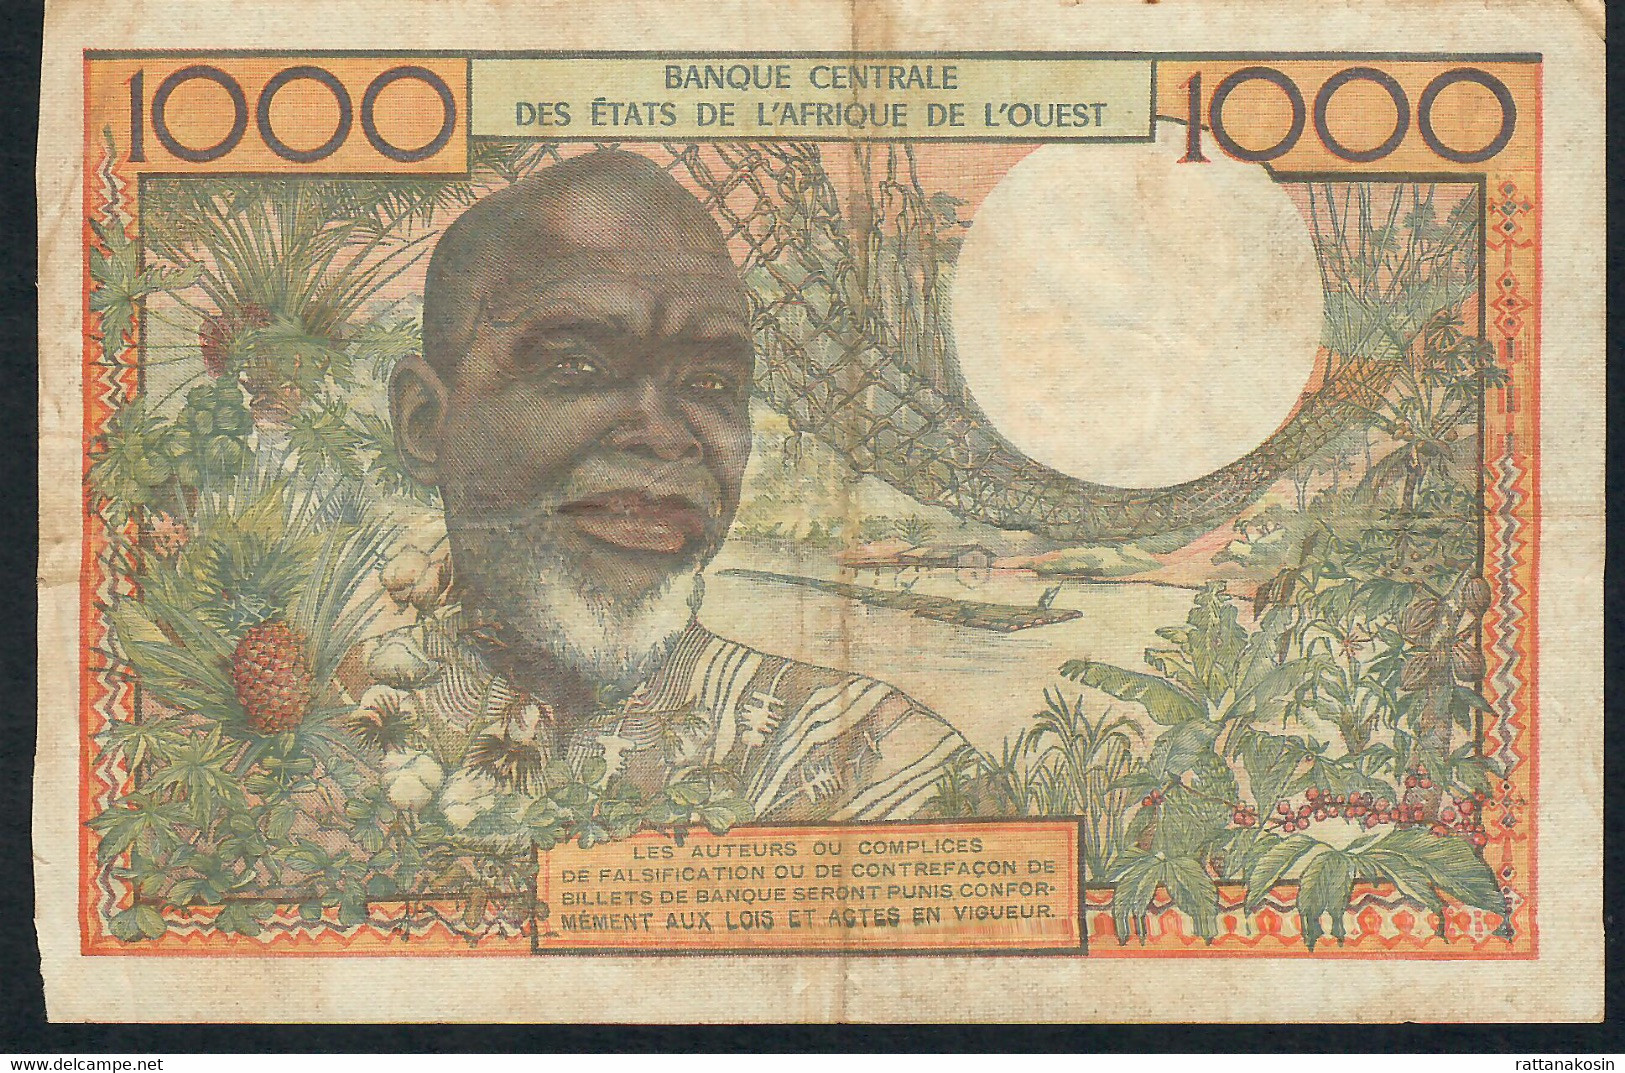 W.A.S.LETTER A IVORY COAST P103Ad 1000 FRANCS 1965 Signatures 4 F-VF NO P.h. ! - West African States